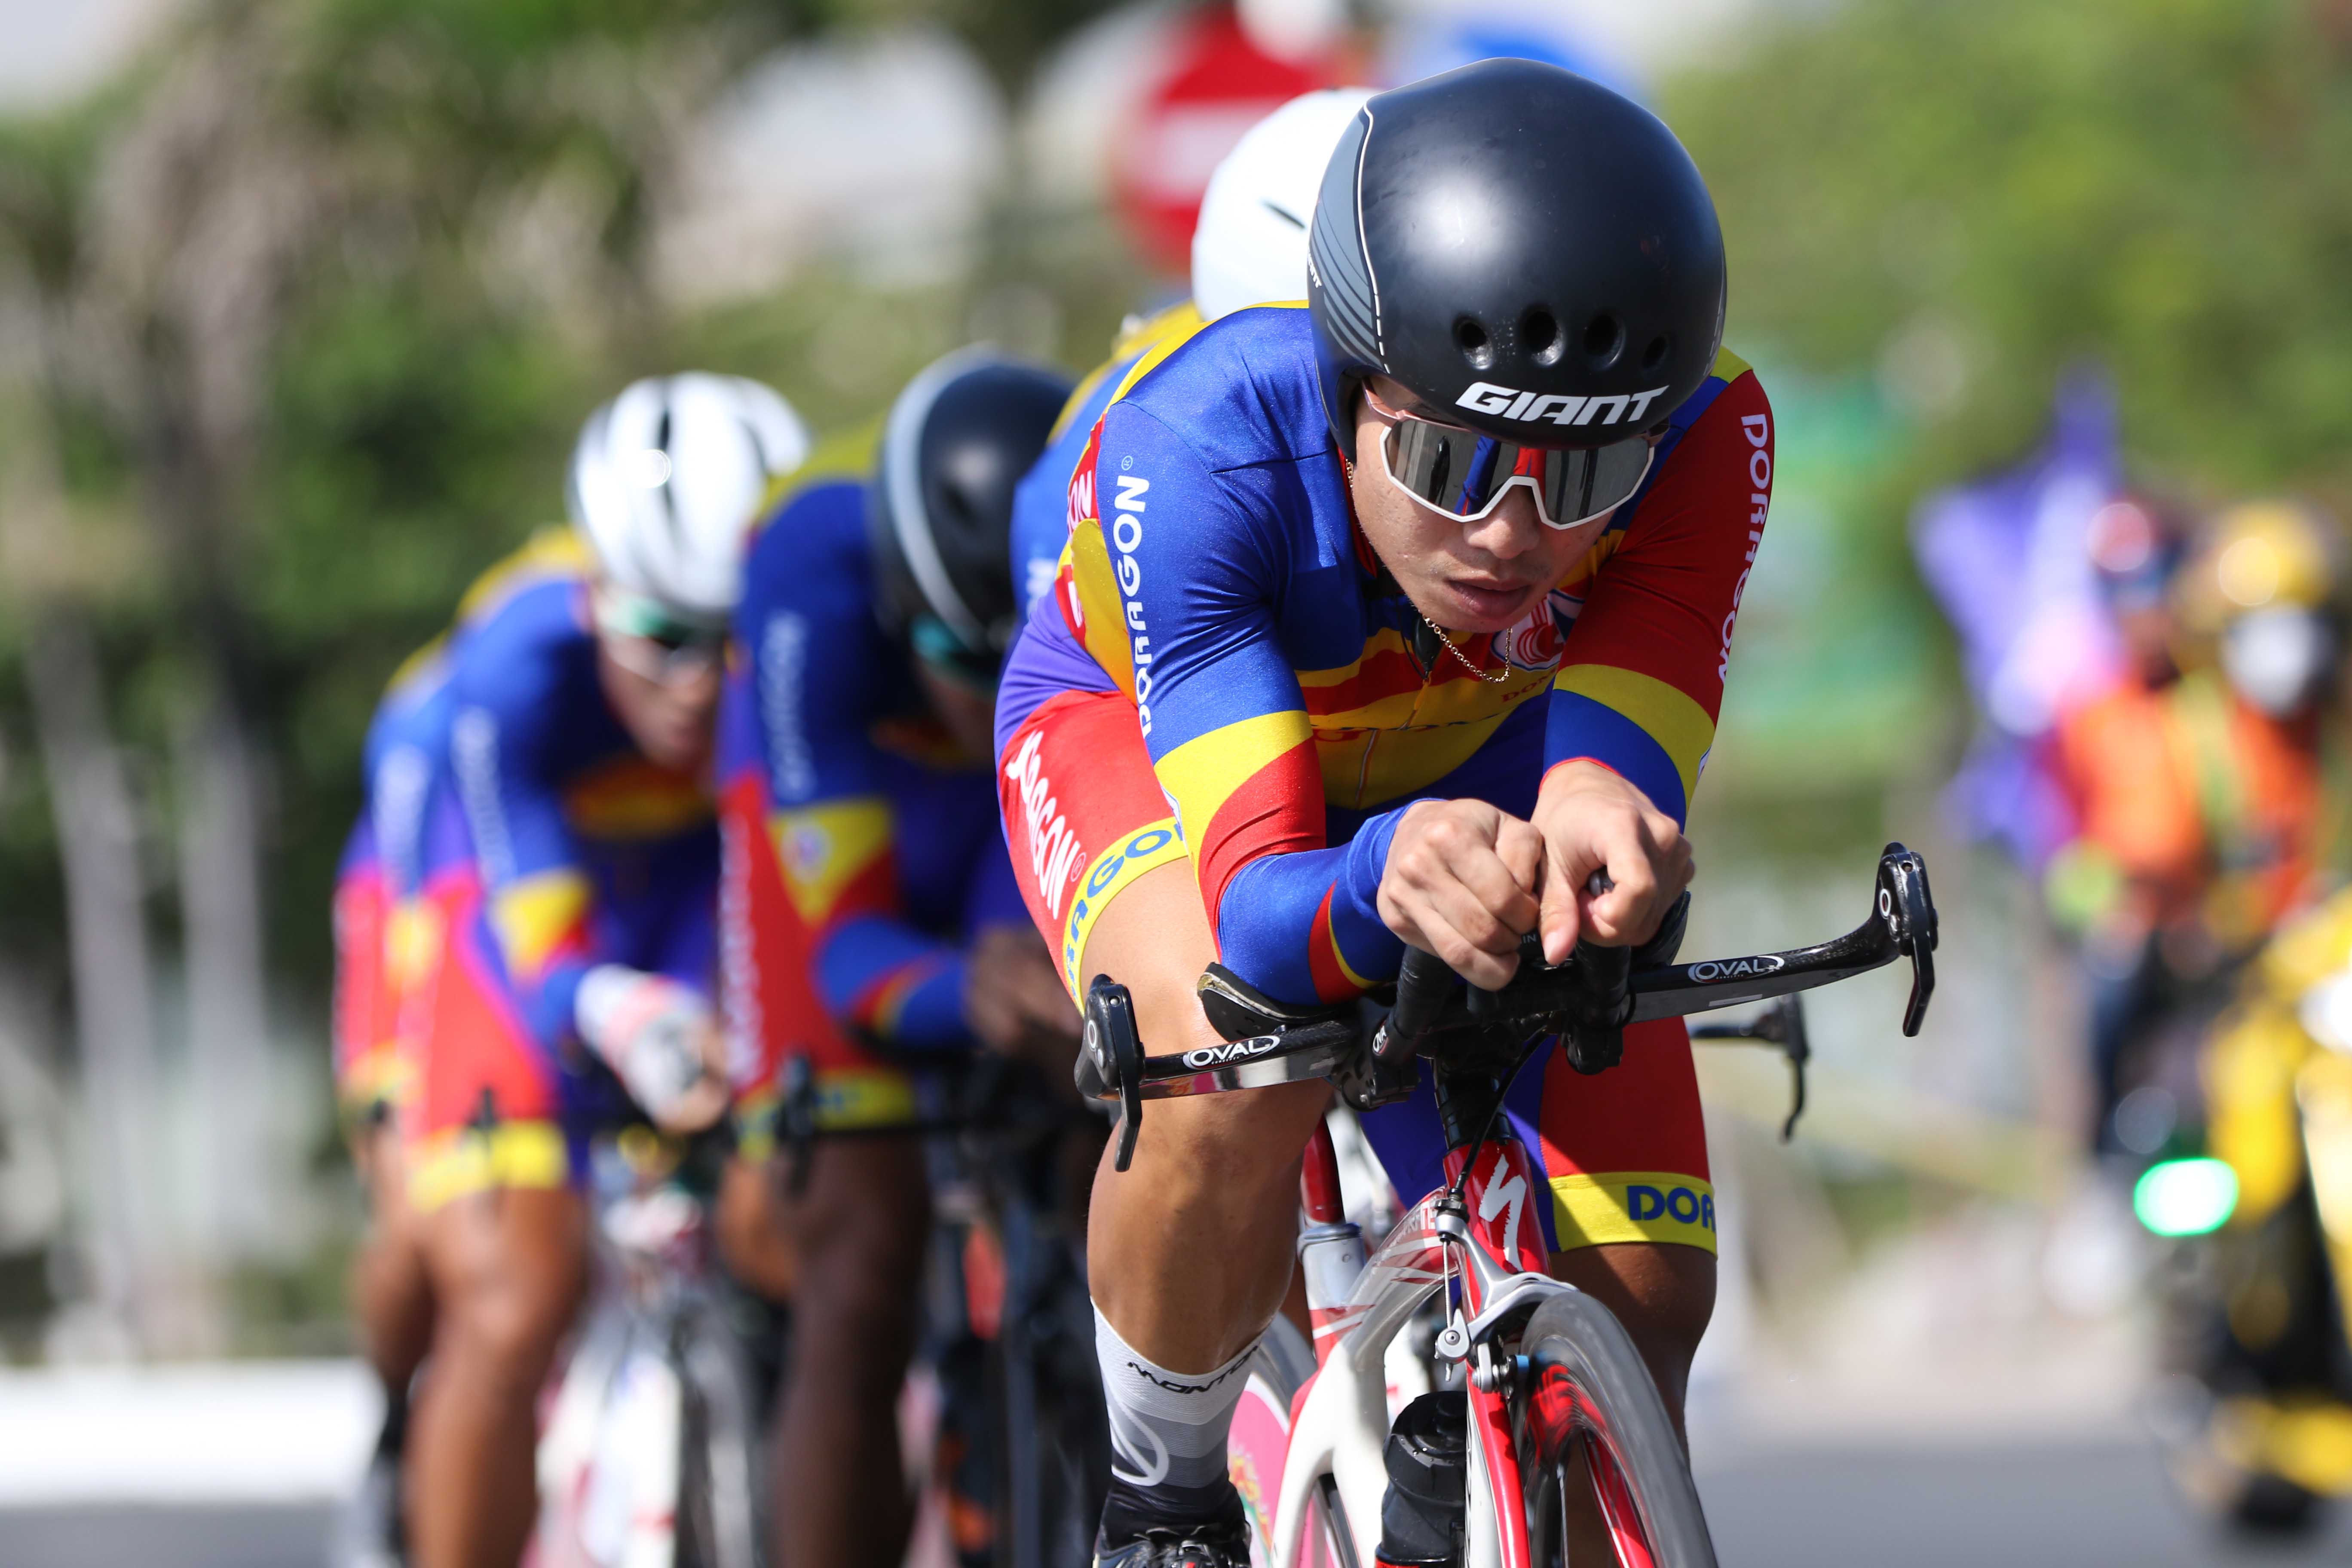 Duoc Domesco Dong Thap cyclists race in the 19th stage of the 2022 Ho Chi Minh City TV (HTV) Cup tournament in Nha Trang City, Khanh Hoa Province, Vietnam, April 25, 2022. Photo: T.P. / Tuoi Tre